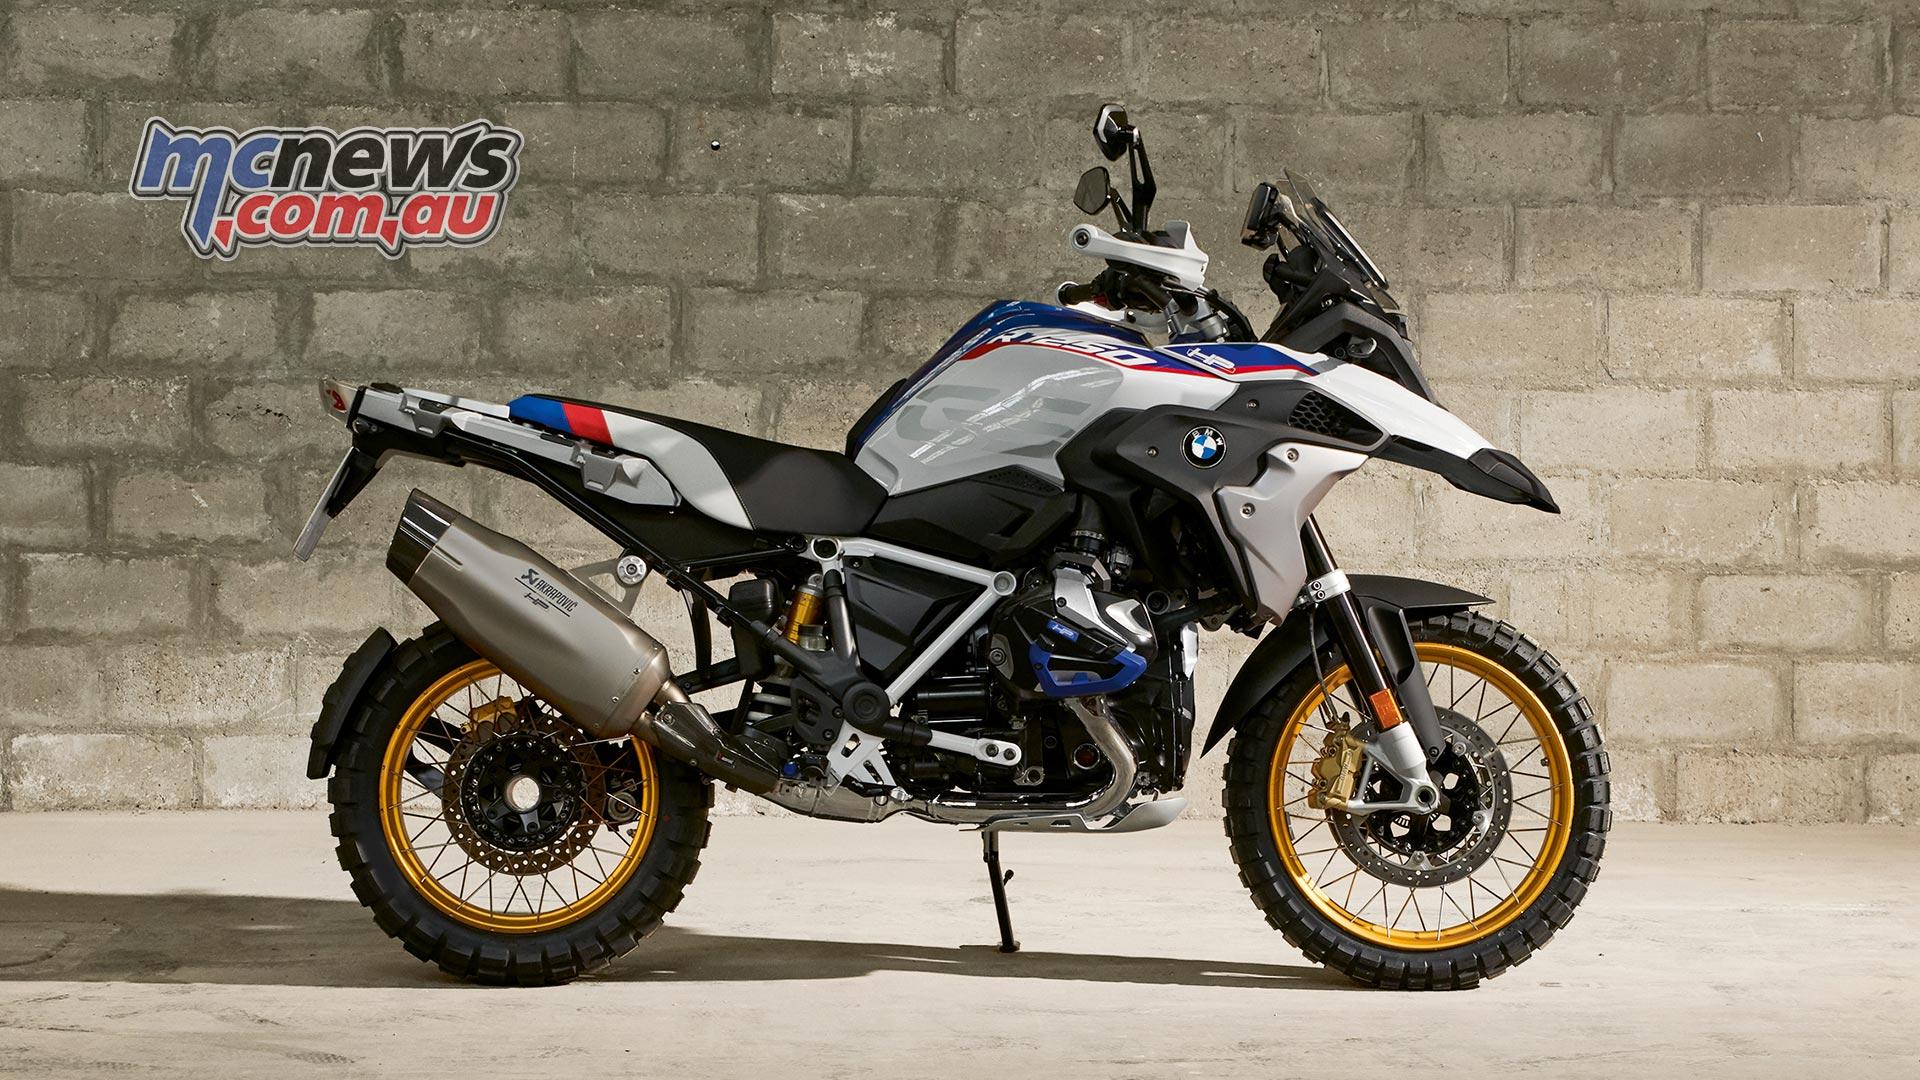 BMW R 1250 GS. More grunt and more tech